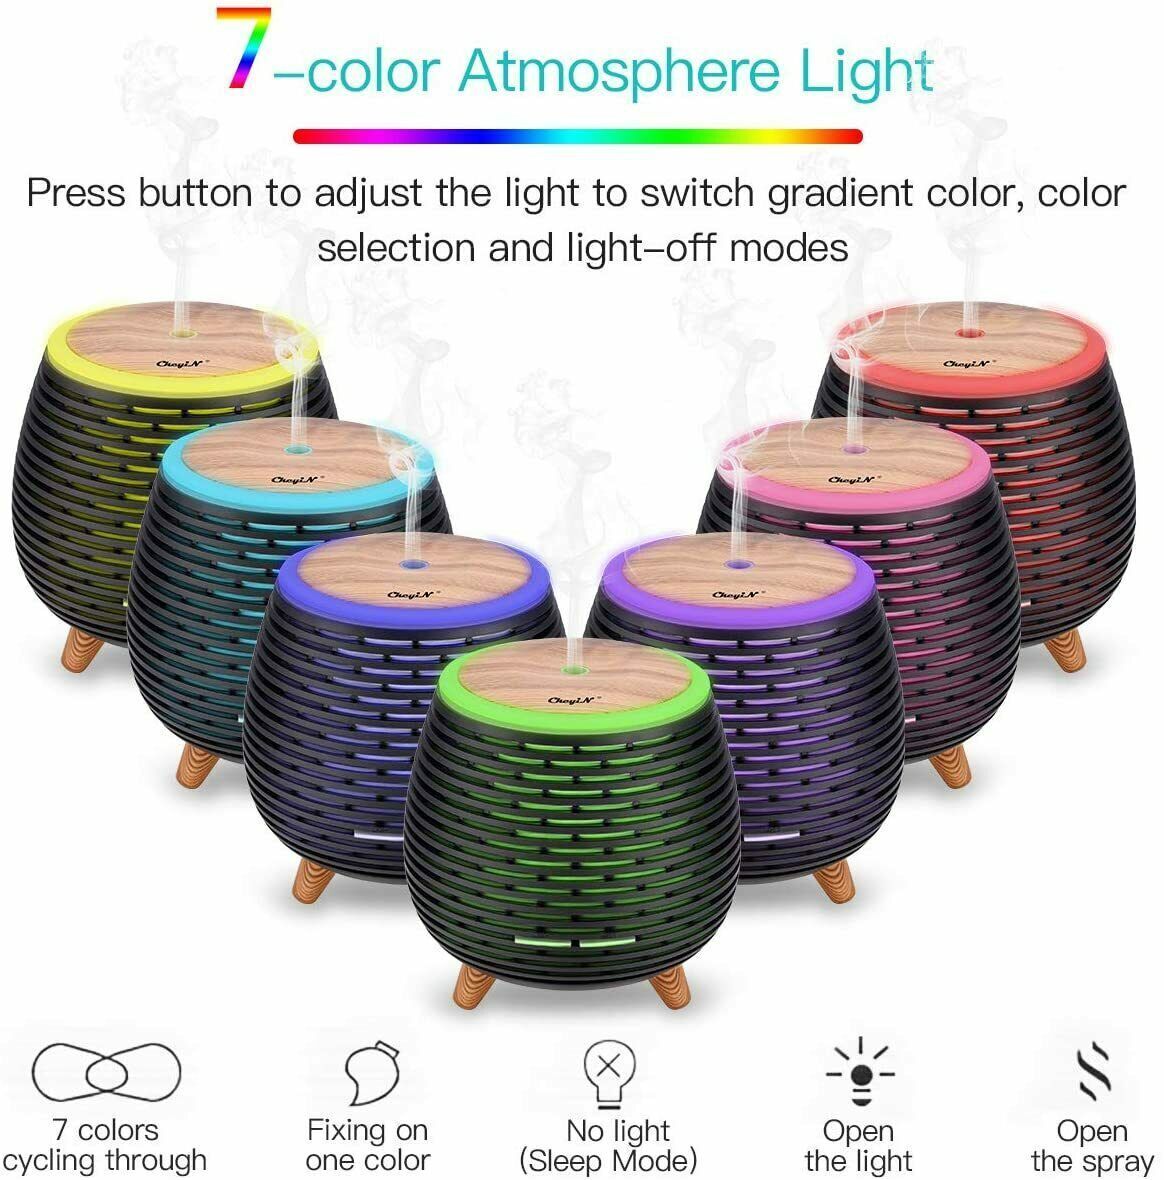 Colorful mini oil diffuser spycams with 7-color LED lights and various operational modes displayed, featuring WiFi connectivity.